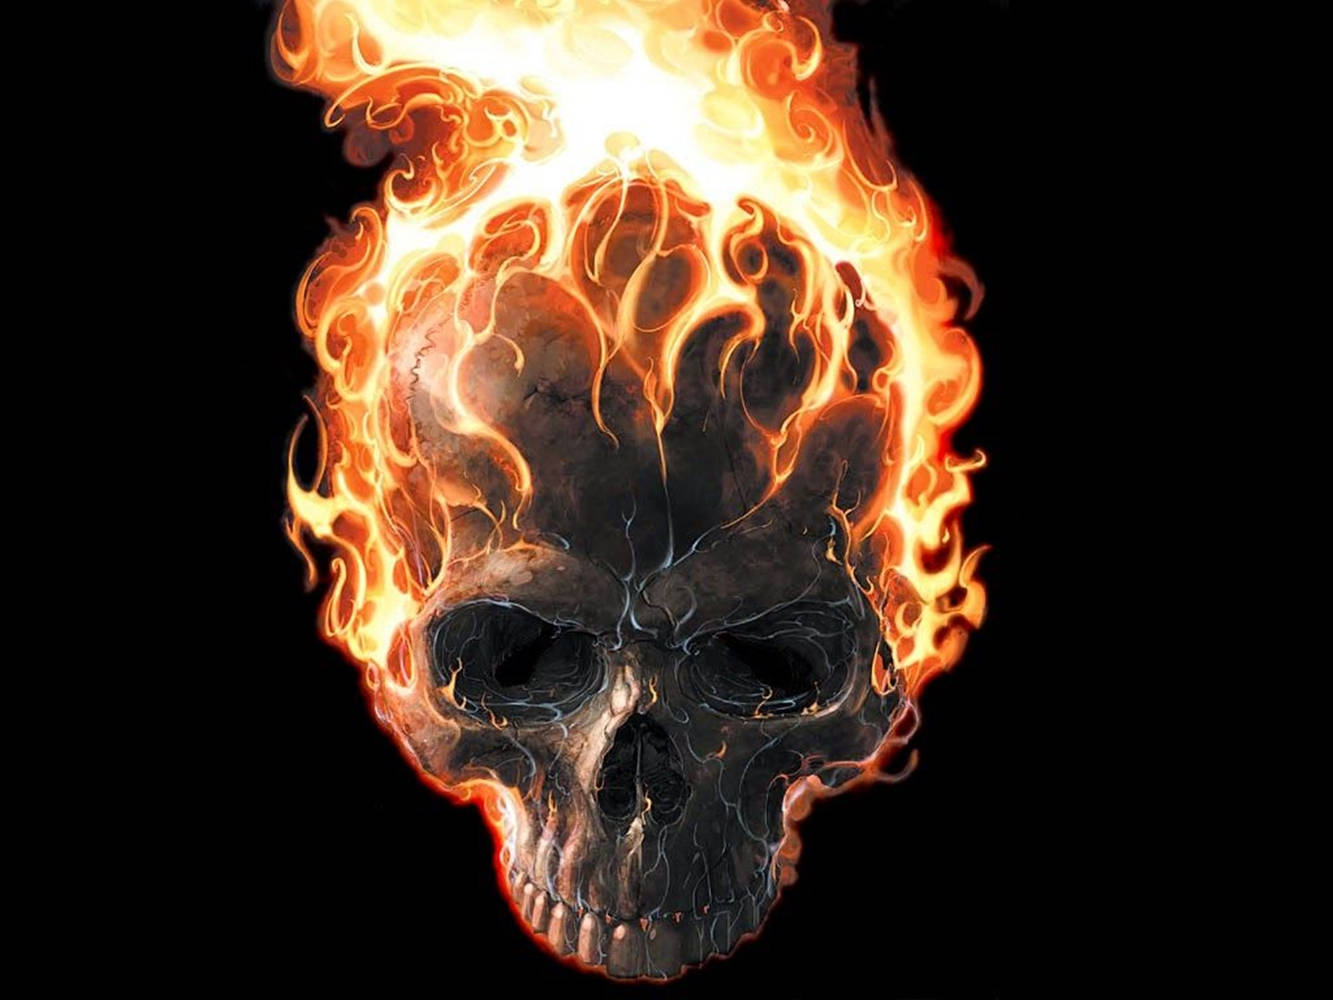 Cool 3d Ghost Skull On Fire Background